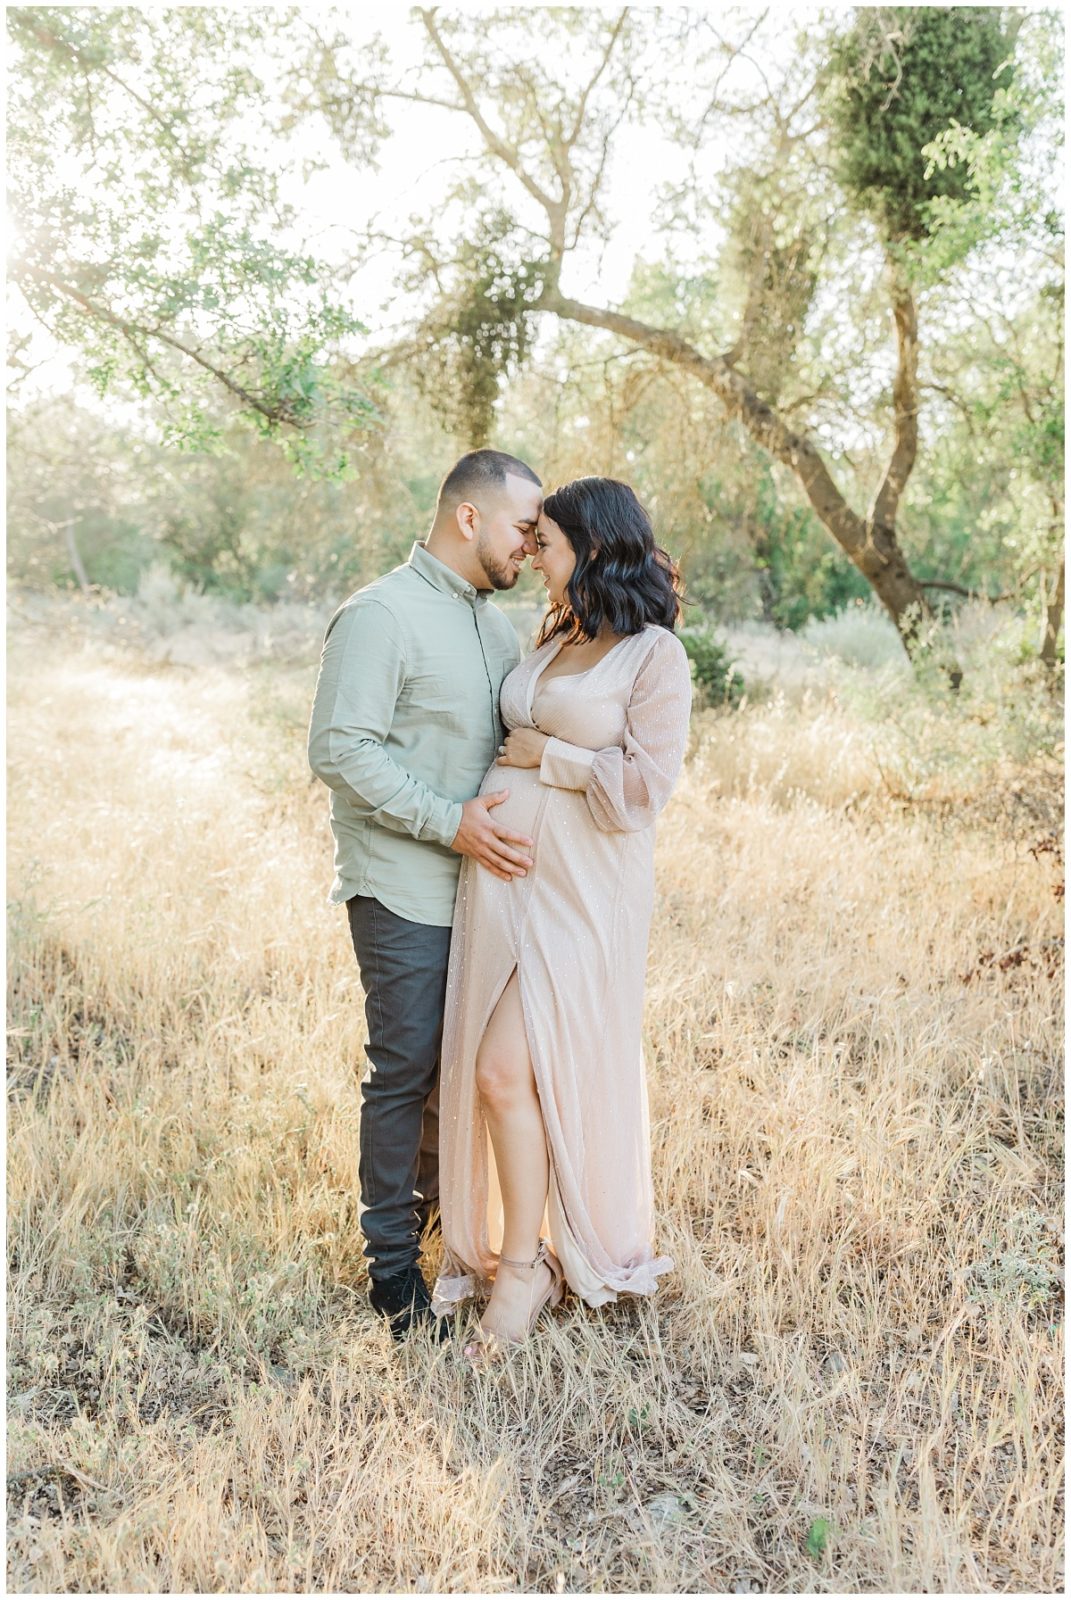 Knights Ferry Maternity Intimate Photos